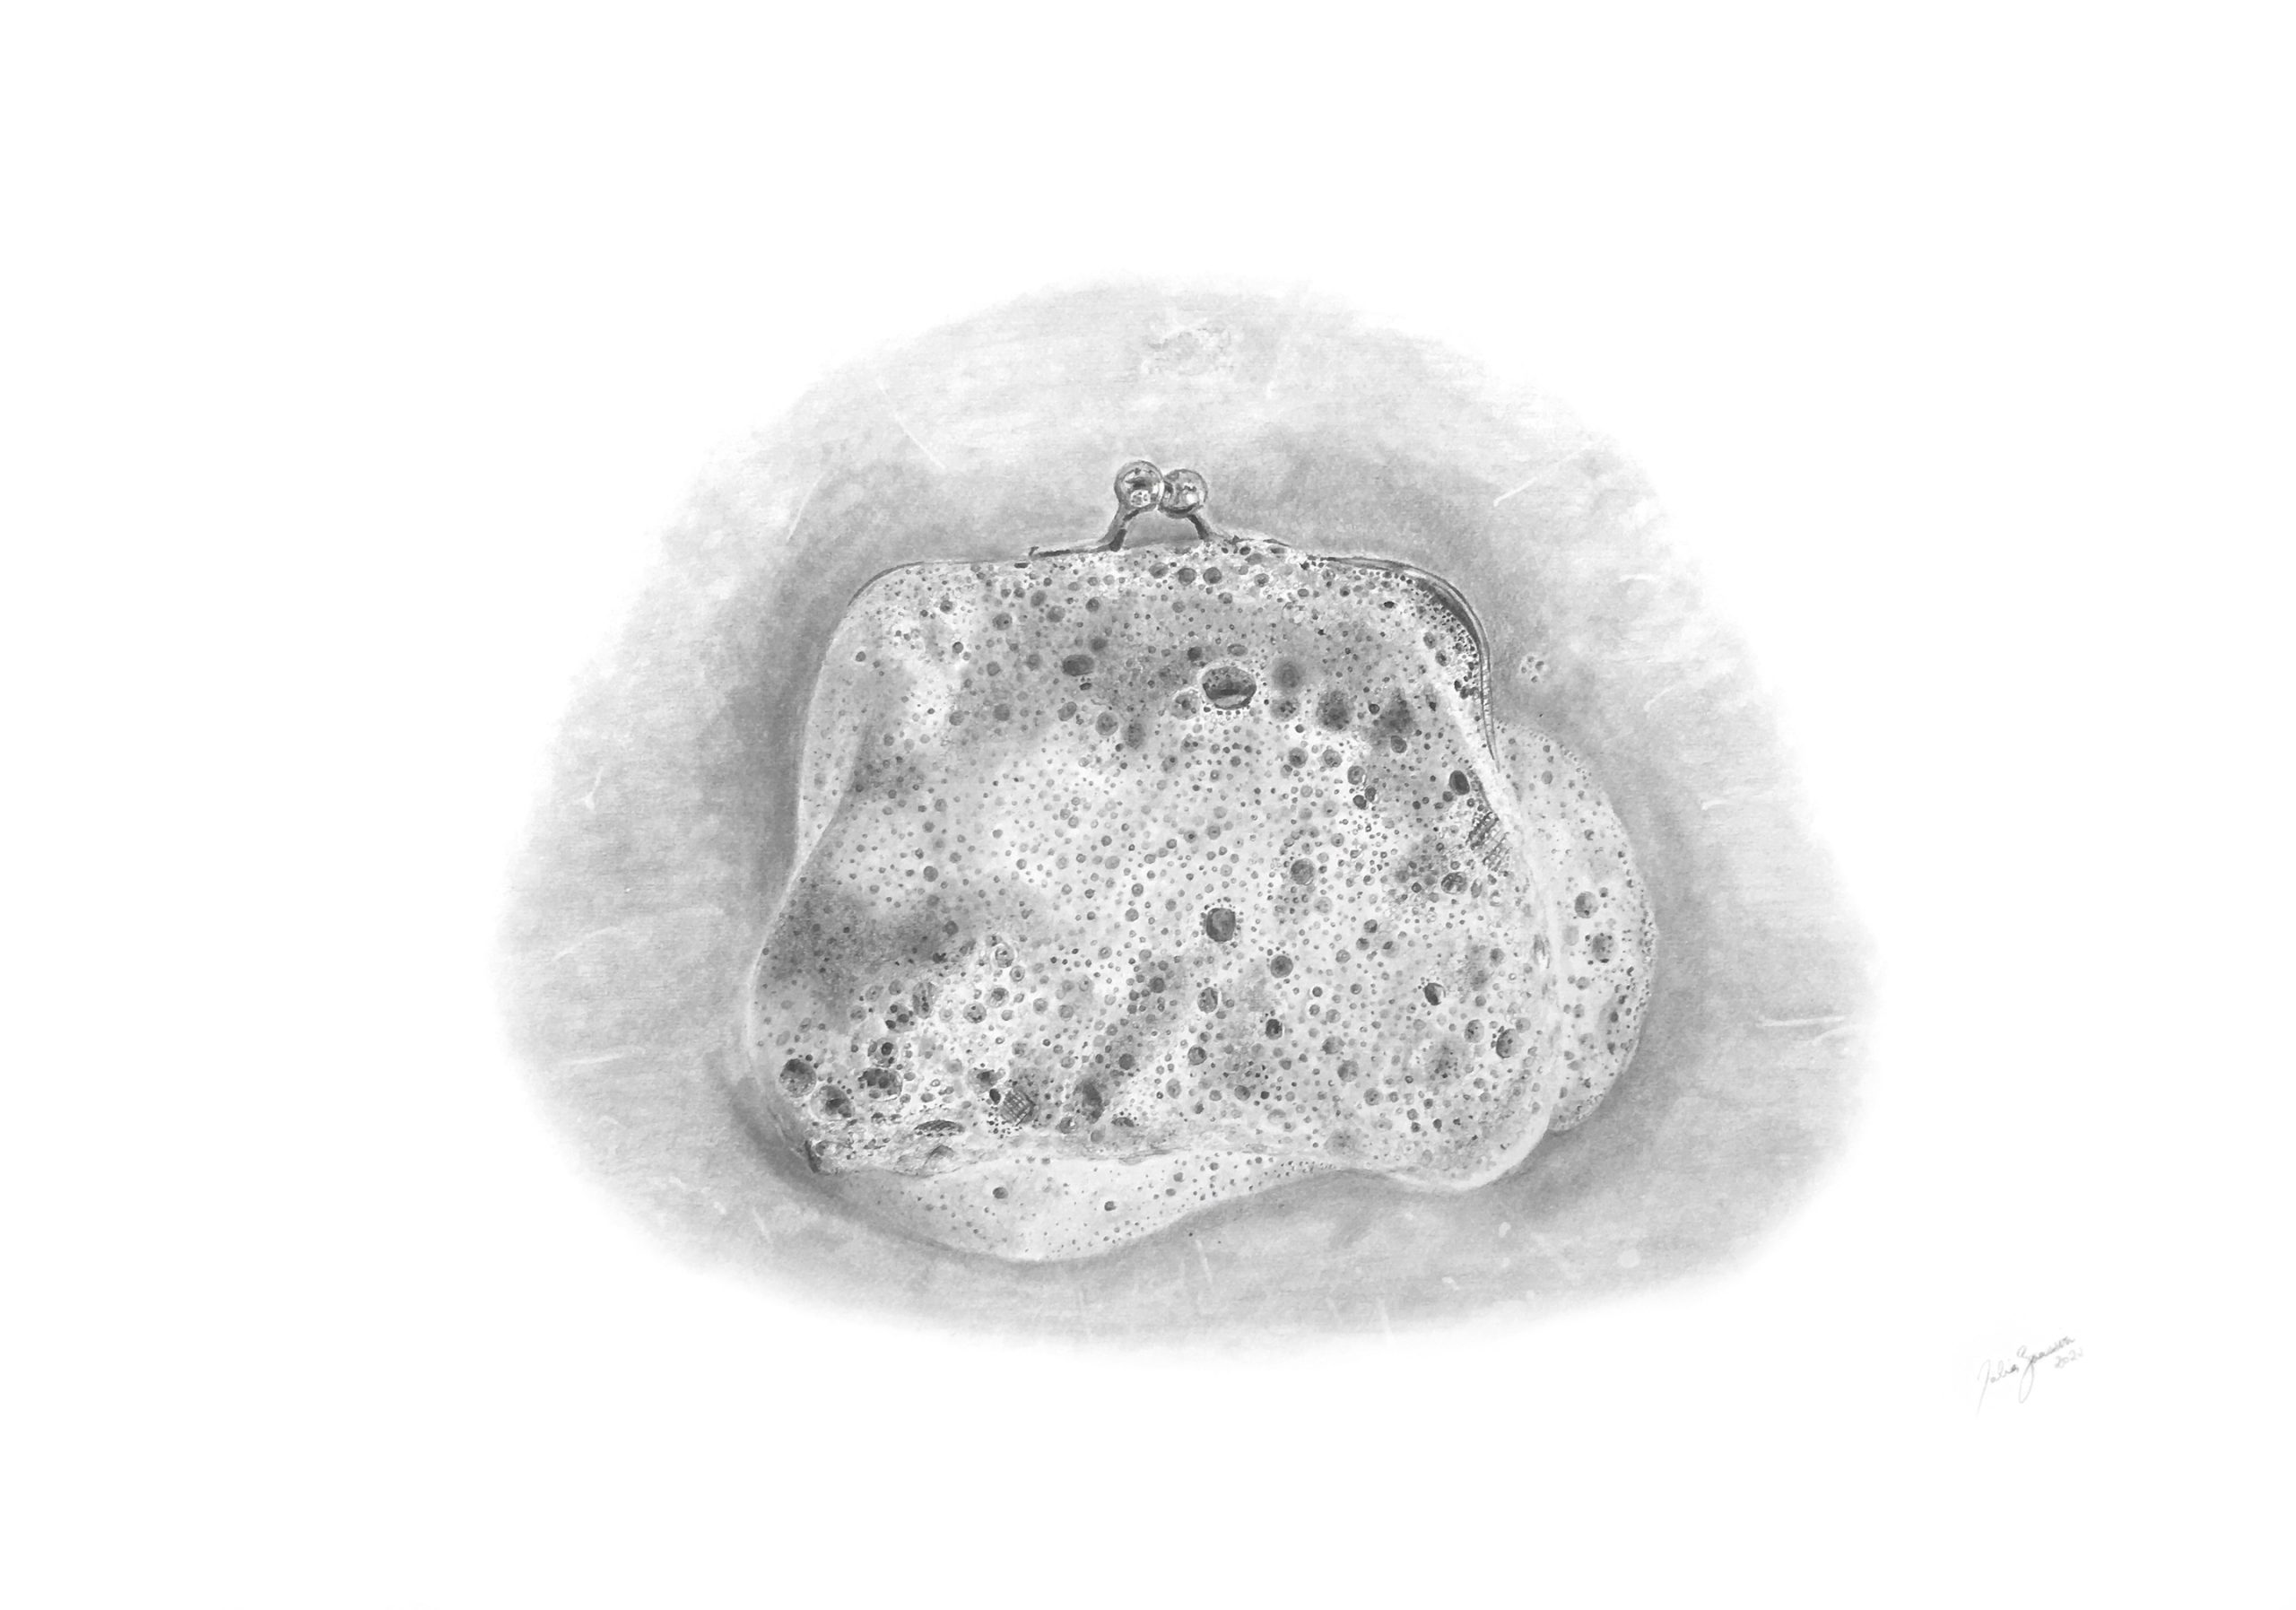 Coin Clutch, 2022, Graphite on Paper, 35 x 50 cm. Courtesy of the Artist